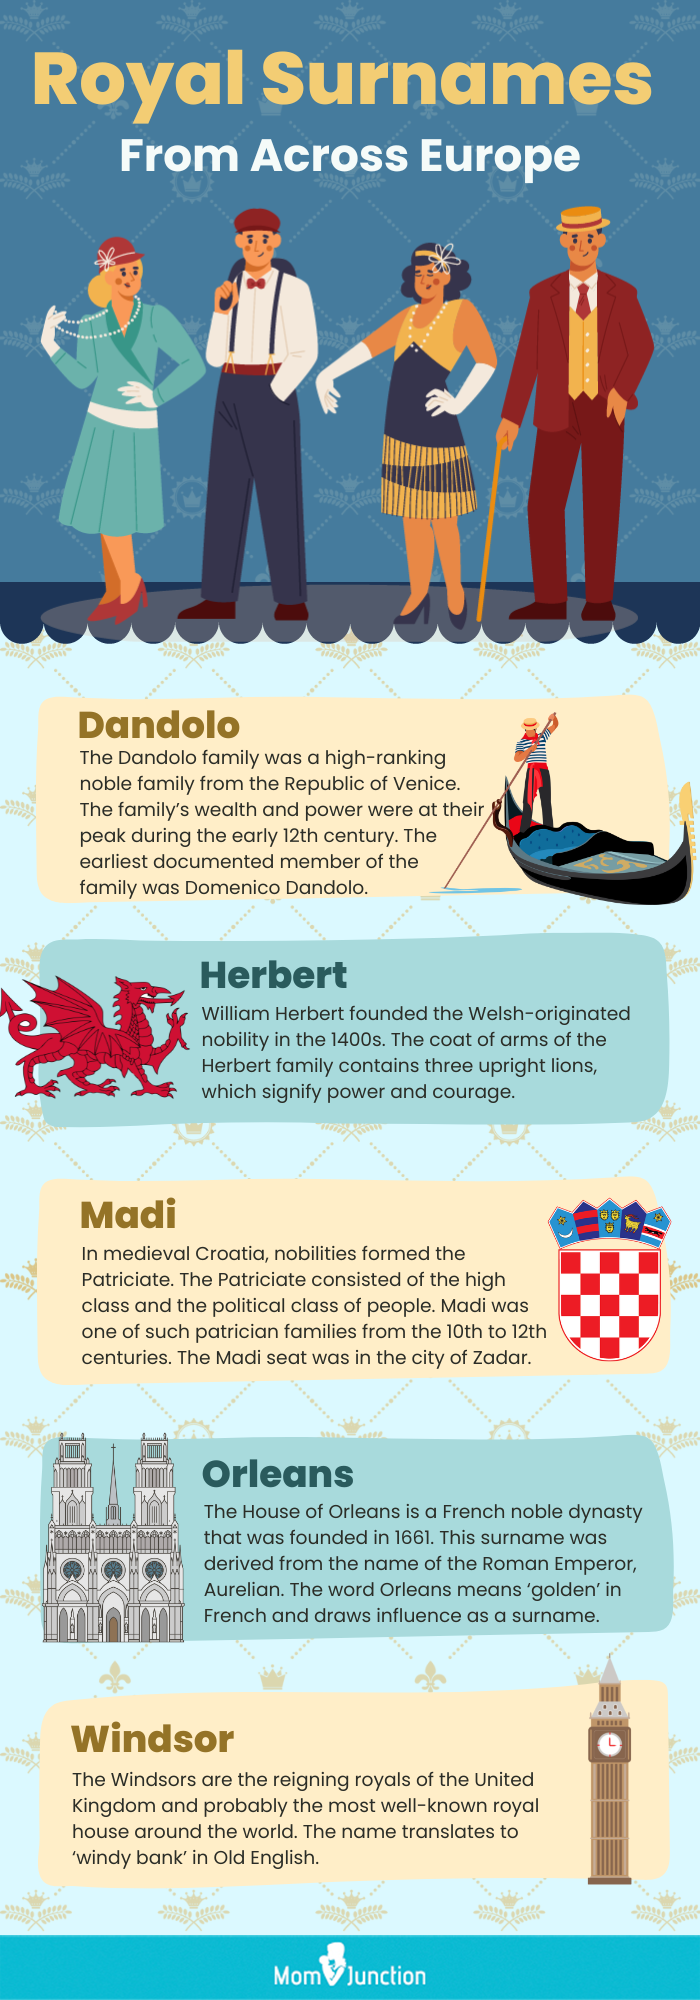 royal surnames from across europe (infographic)